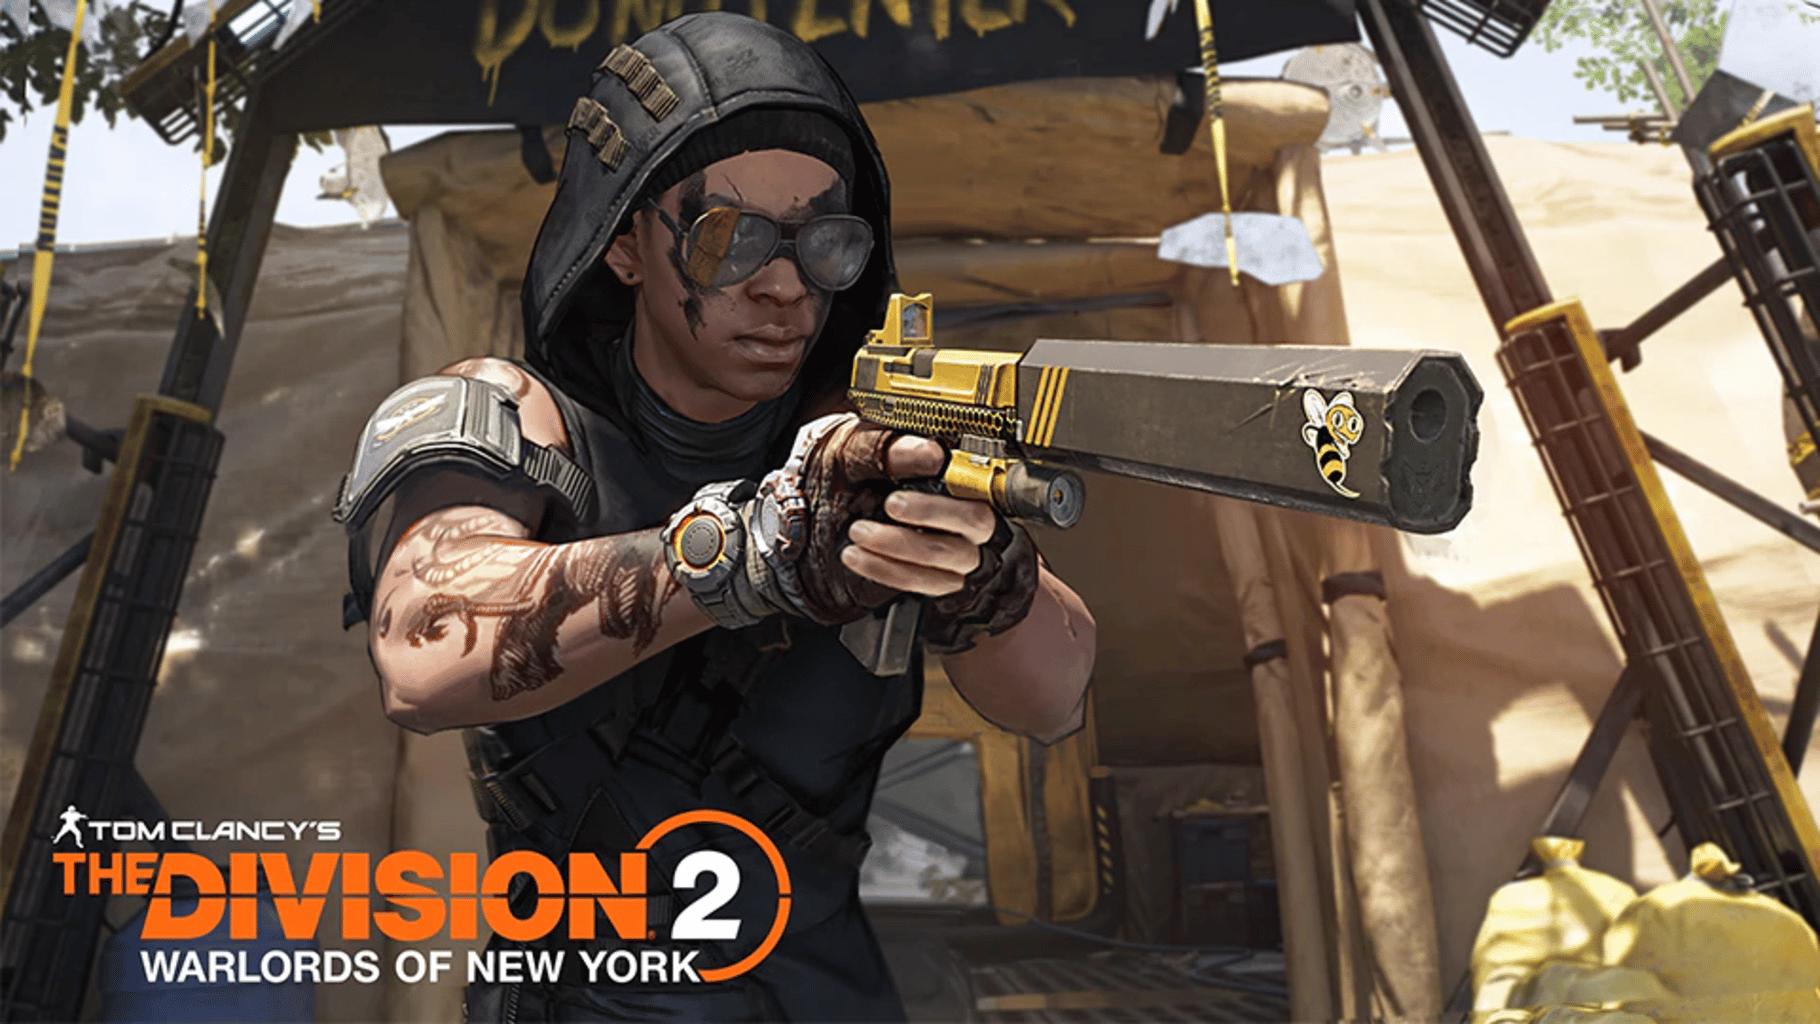 Tom Clancy's The Division 2: Warlords of New York - Season 10: Price of Power screenshot